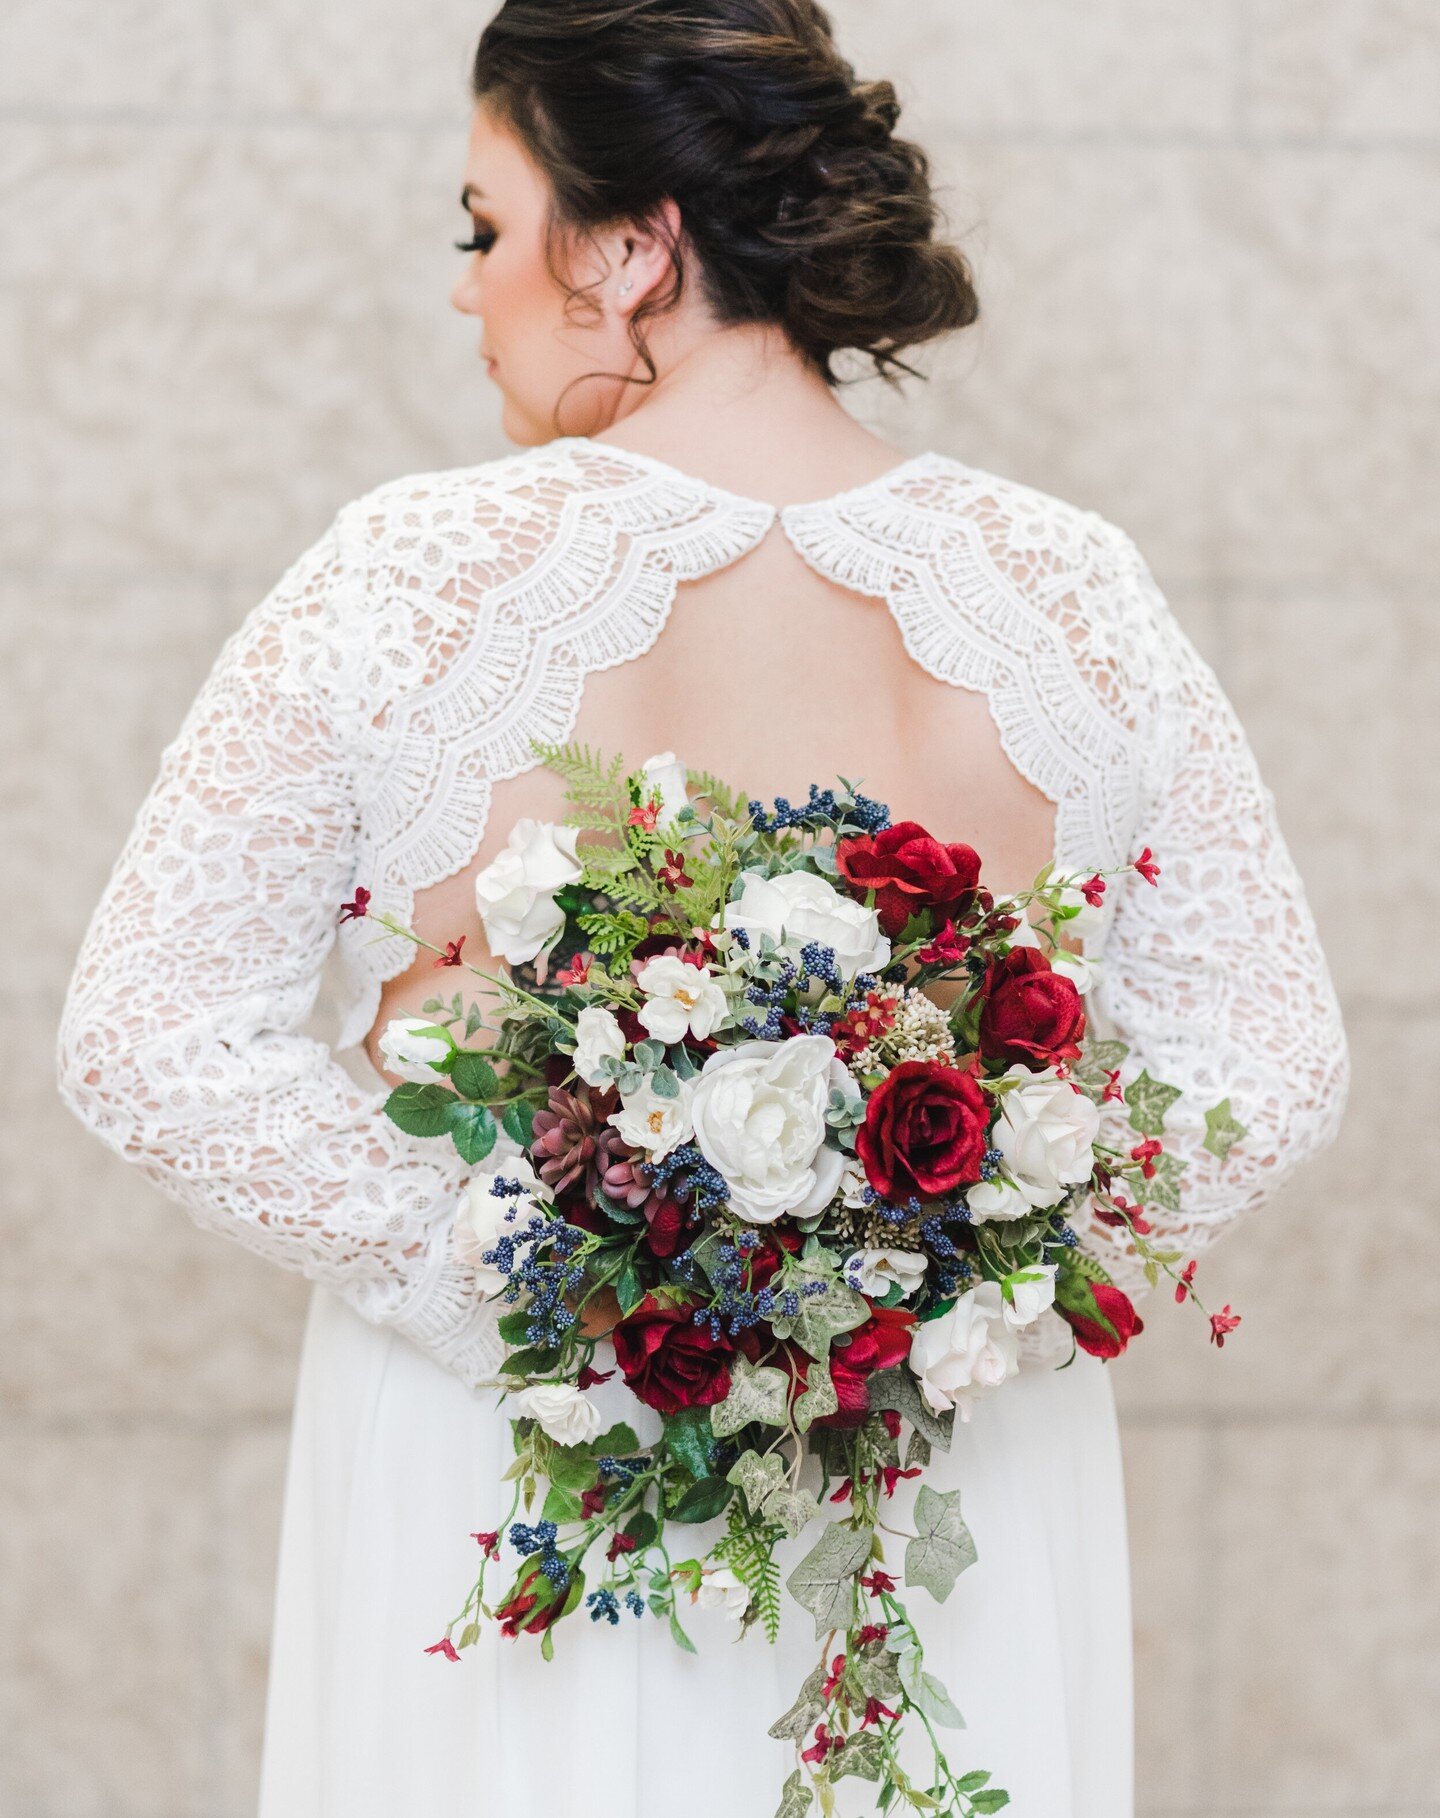 These details!!!! Forever swooning over the back of this dress and these florals.